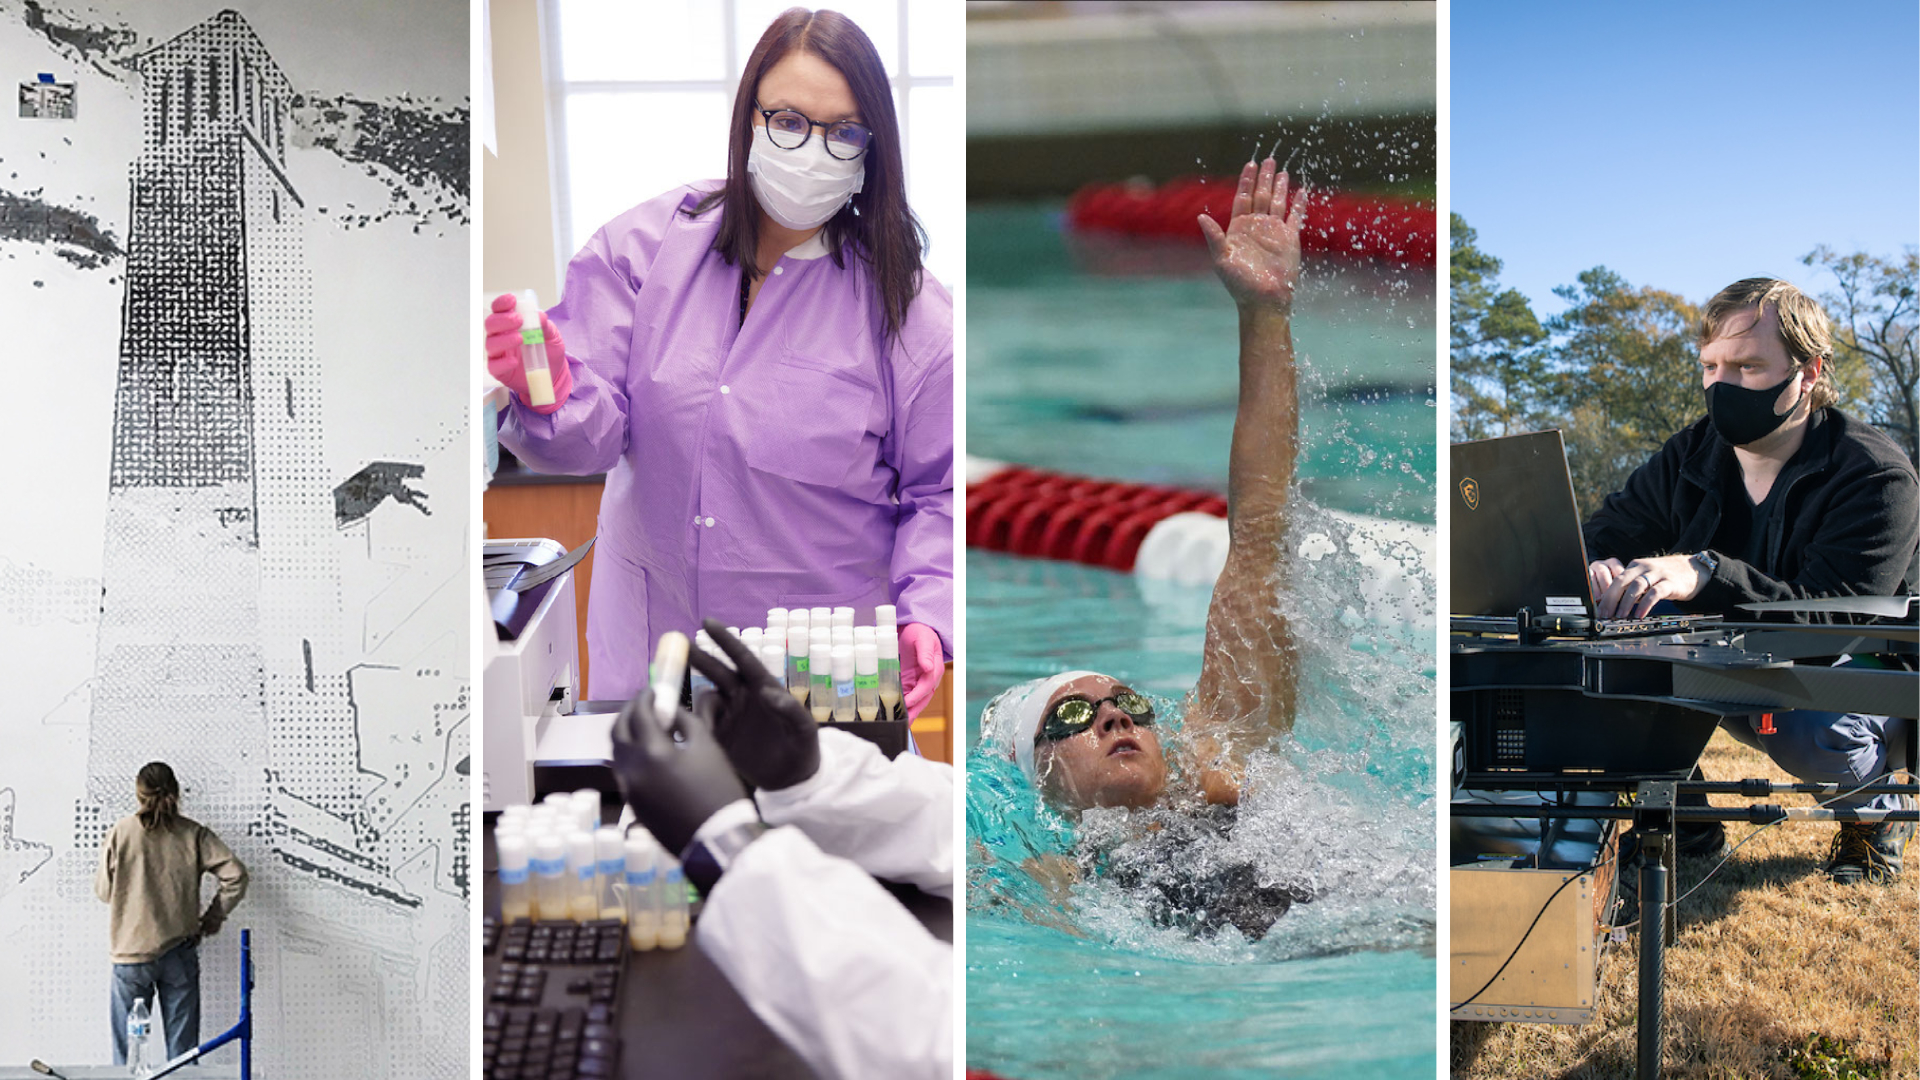 collage of four pictures, including a man sculpting a mural, a researchers in a lab, a woman swimming in a pool., and a man working on a drone